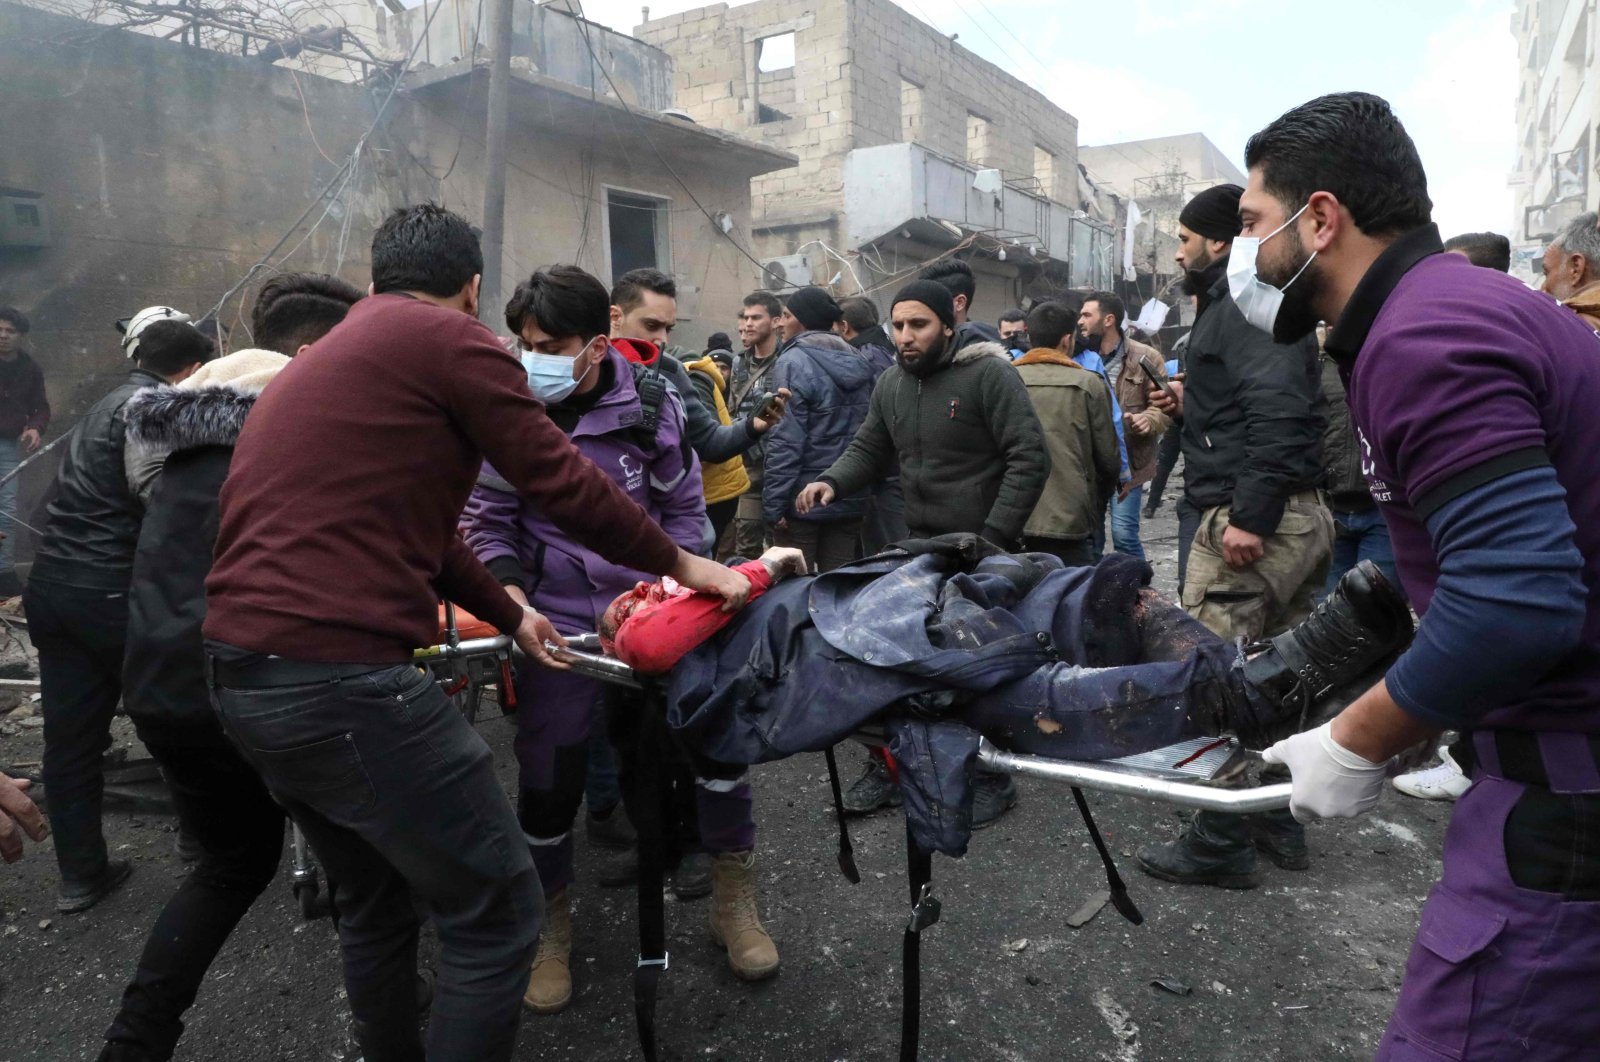 Rescue workers carry away a victim at the scene of an explosion in the town of Azaz in the opposition-controlled northern countryside of Syria's Aleppo province, on Jan. 31, 2021. (AFP)